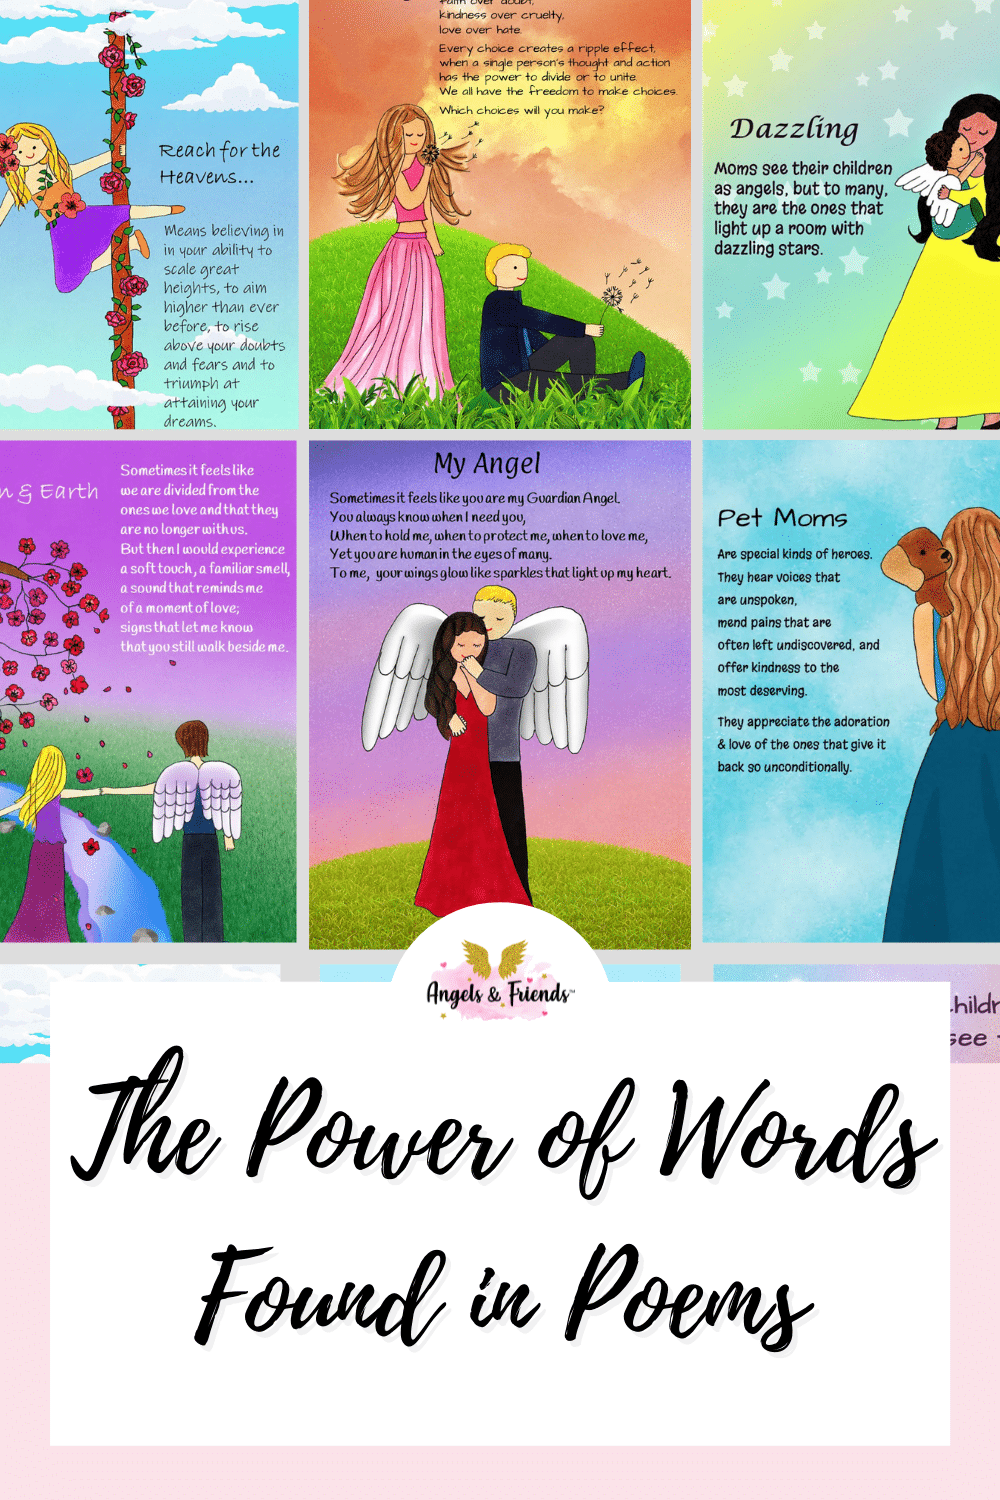 The Power of Words Found in Poems